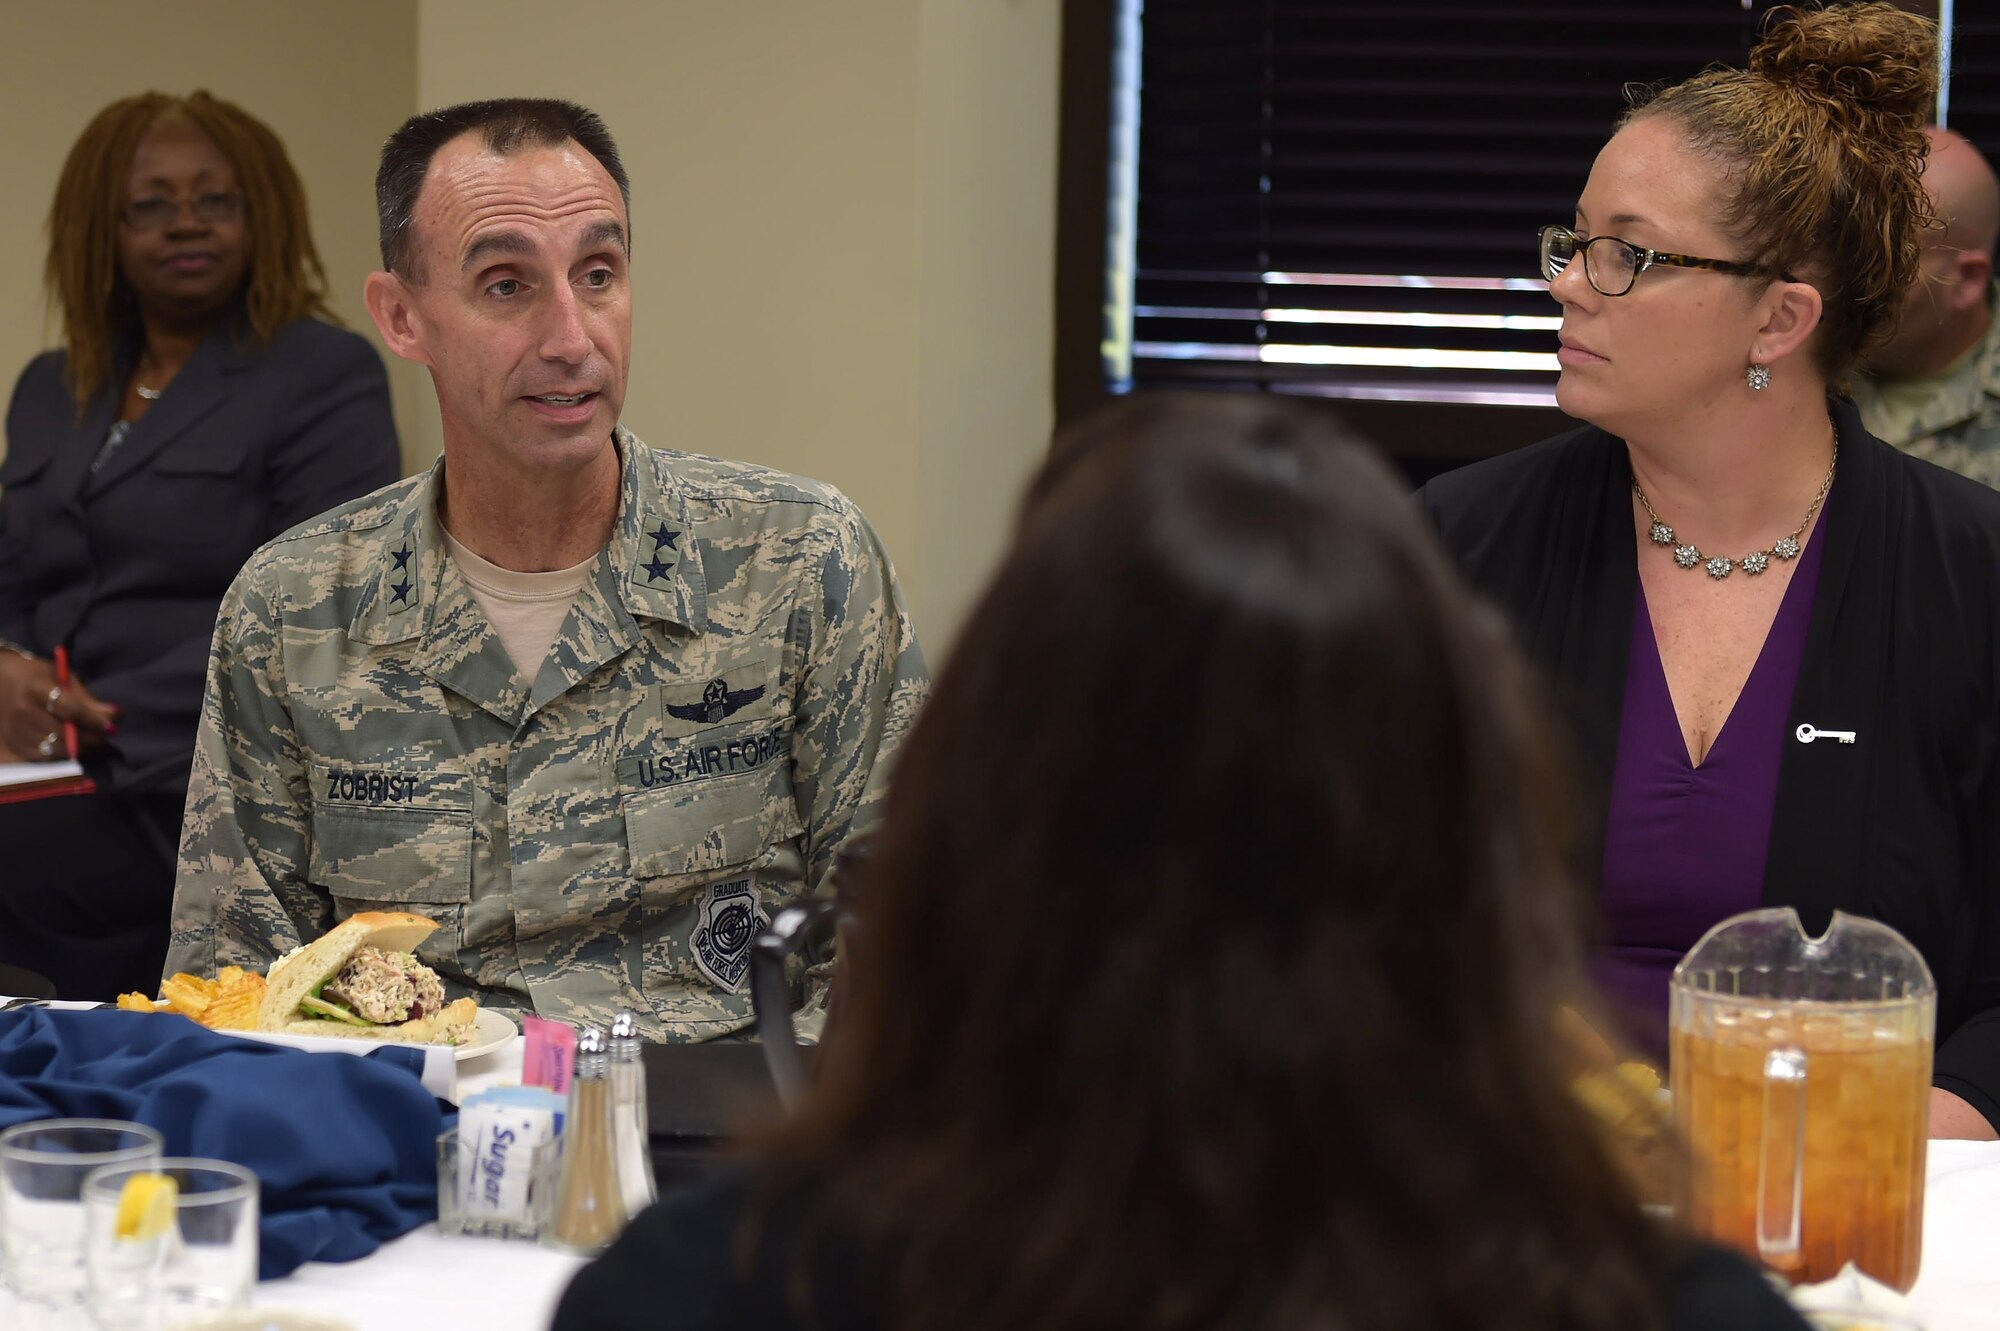 From left, U.S. Air Force Maj. Gen. Scott Zobrist, 9th Air Force commander, eats lunch with 633rd Air Base Wing Key Spouses and first sergeants during a visit at Joint Base Langley-Eustis, Va., Oct. 18, 2016. During their discussion, the crowd discussed Key Spouse socials and other concerns. (U.S. Air Force photo by Senior Airman Kimberly Nagle) 